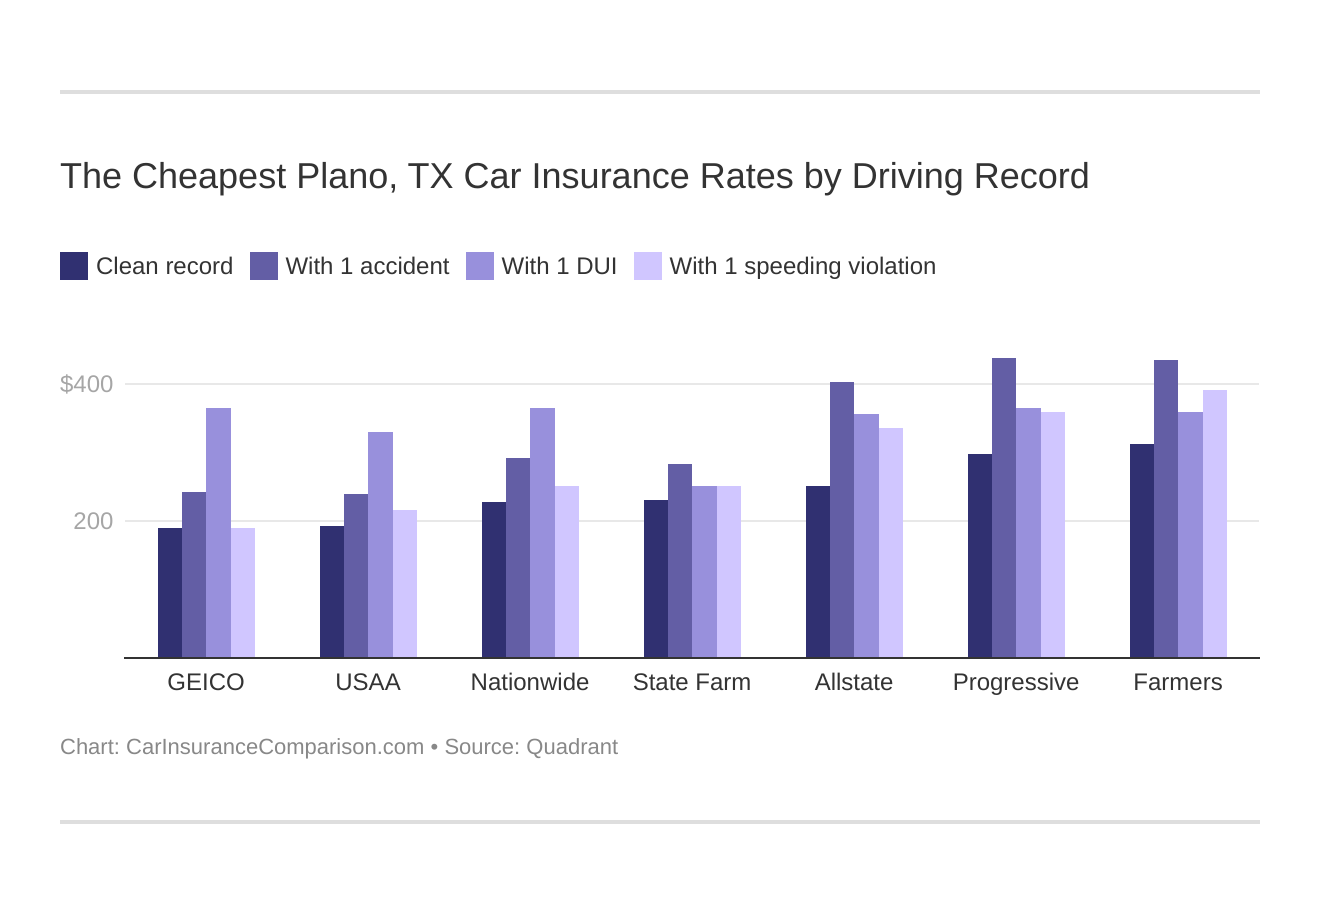 The Cheapest Plano, TX Car Insurance Rates by Driving Record